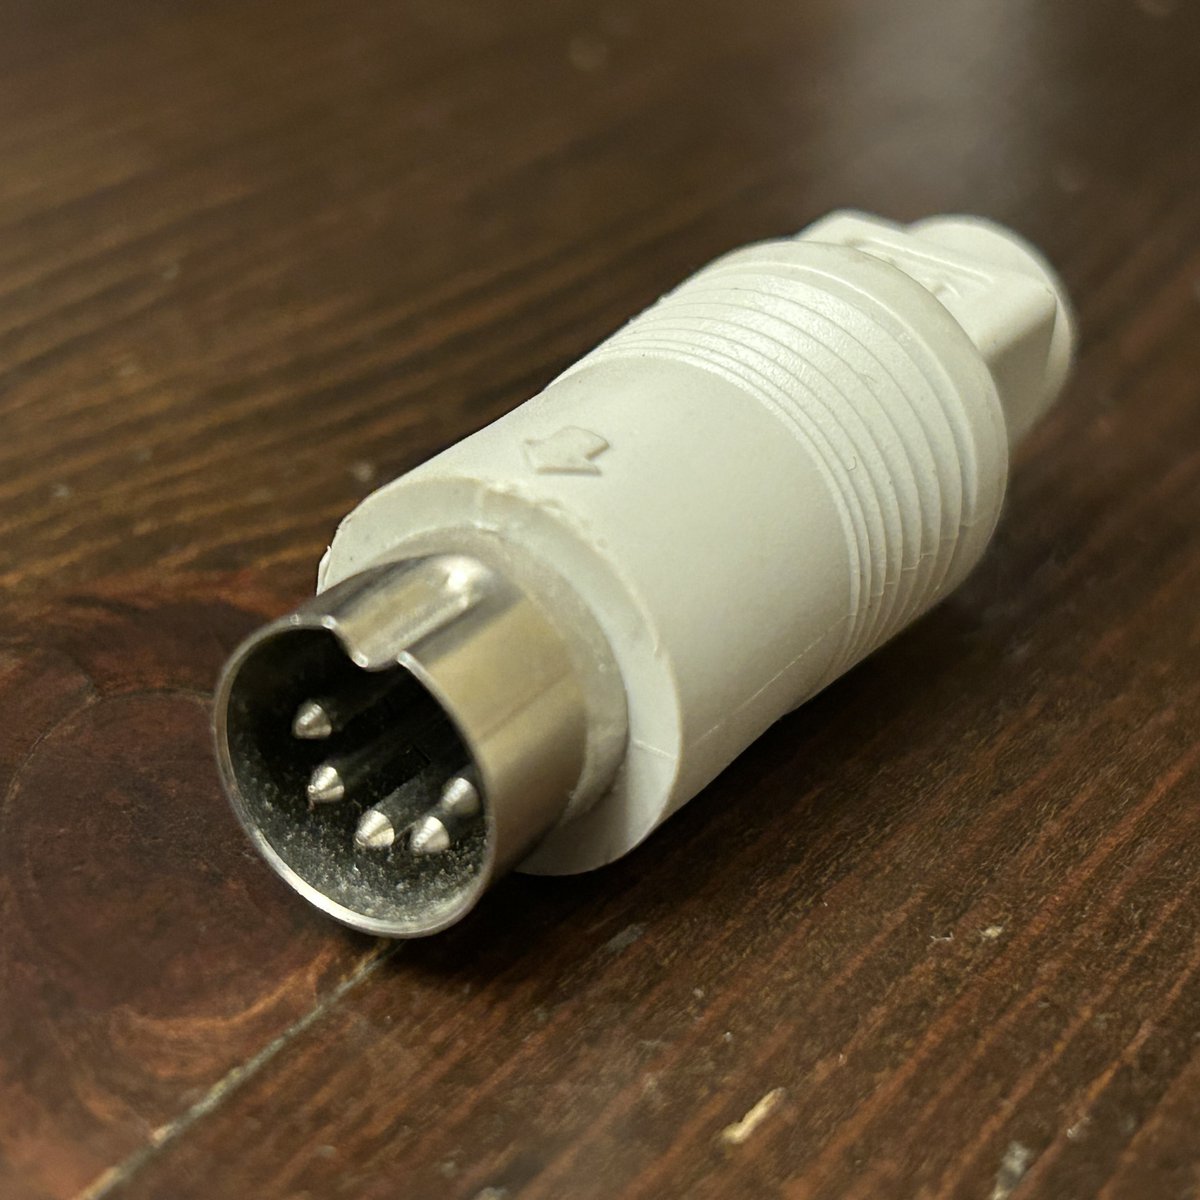 If you ever used this type of adapter, you were part of an epic time in computing.